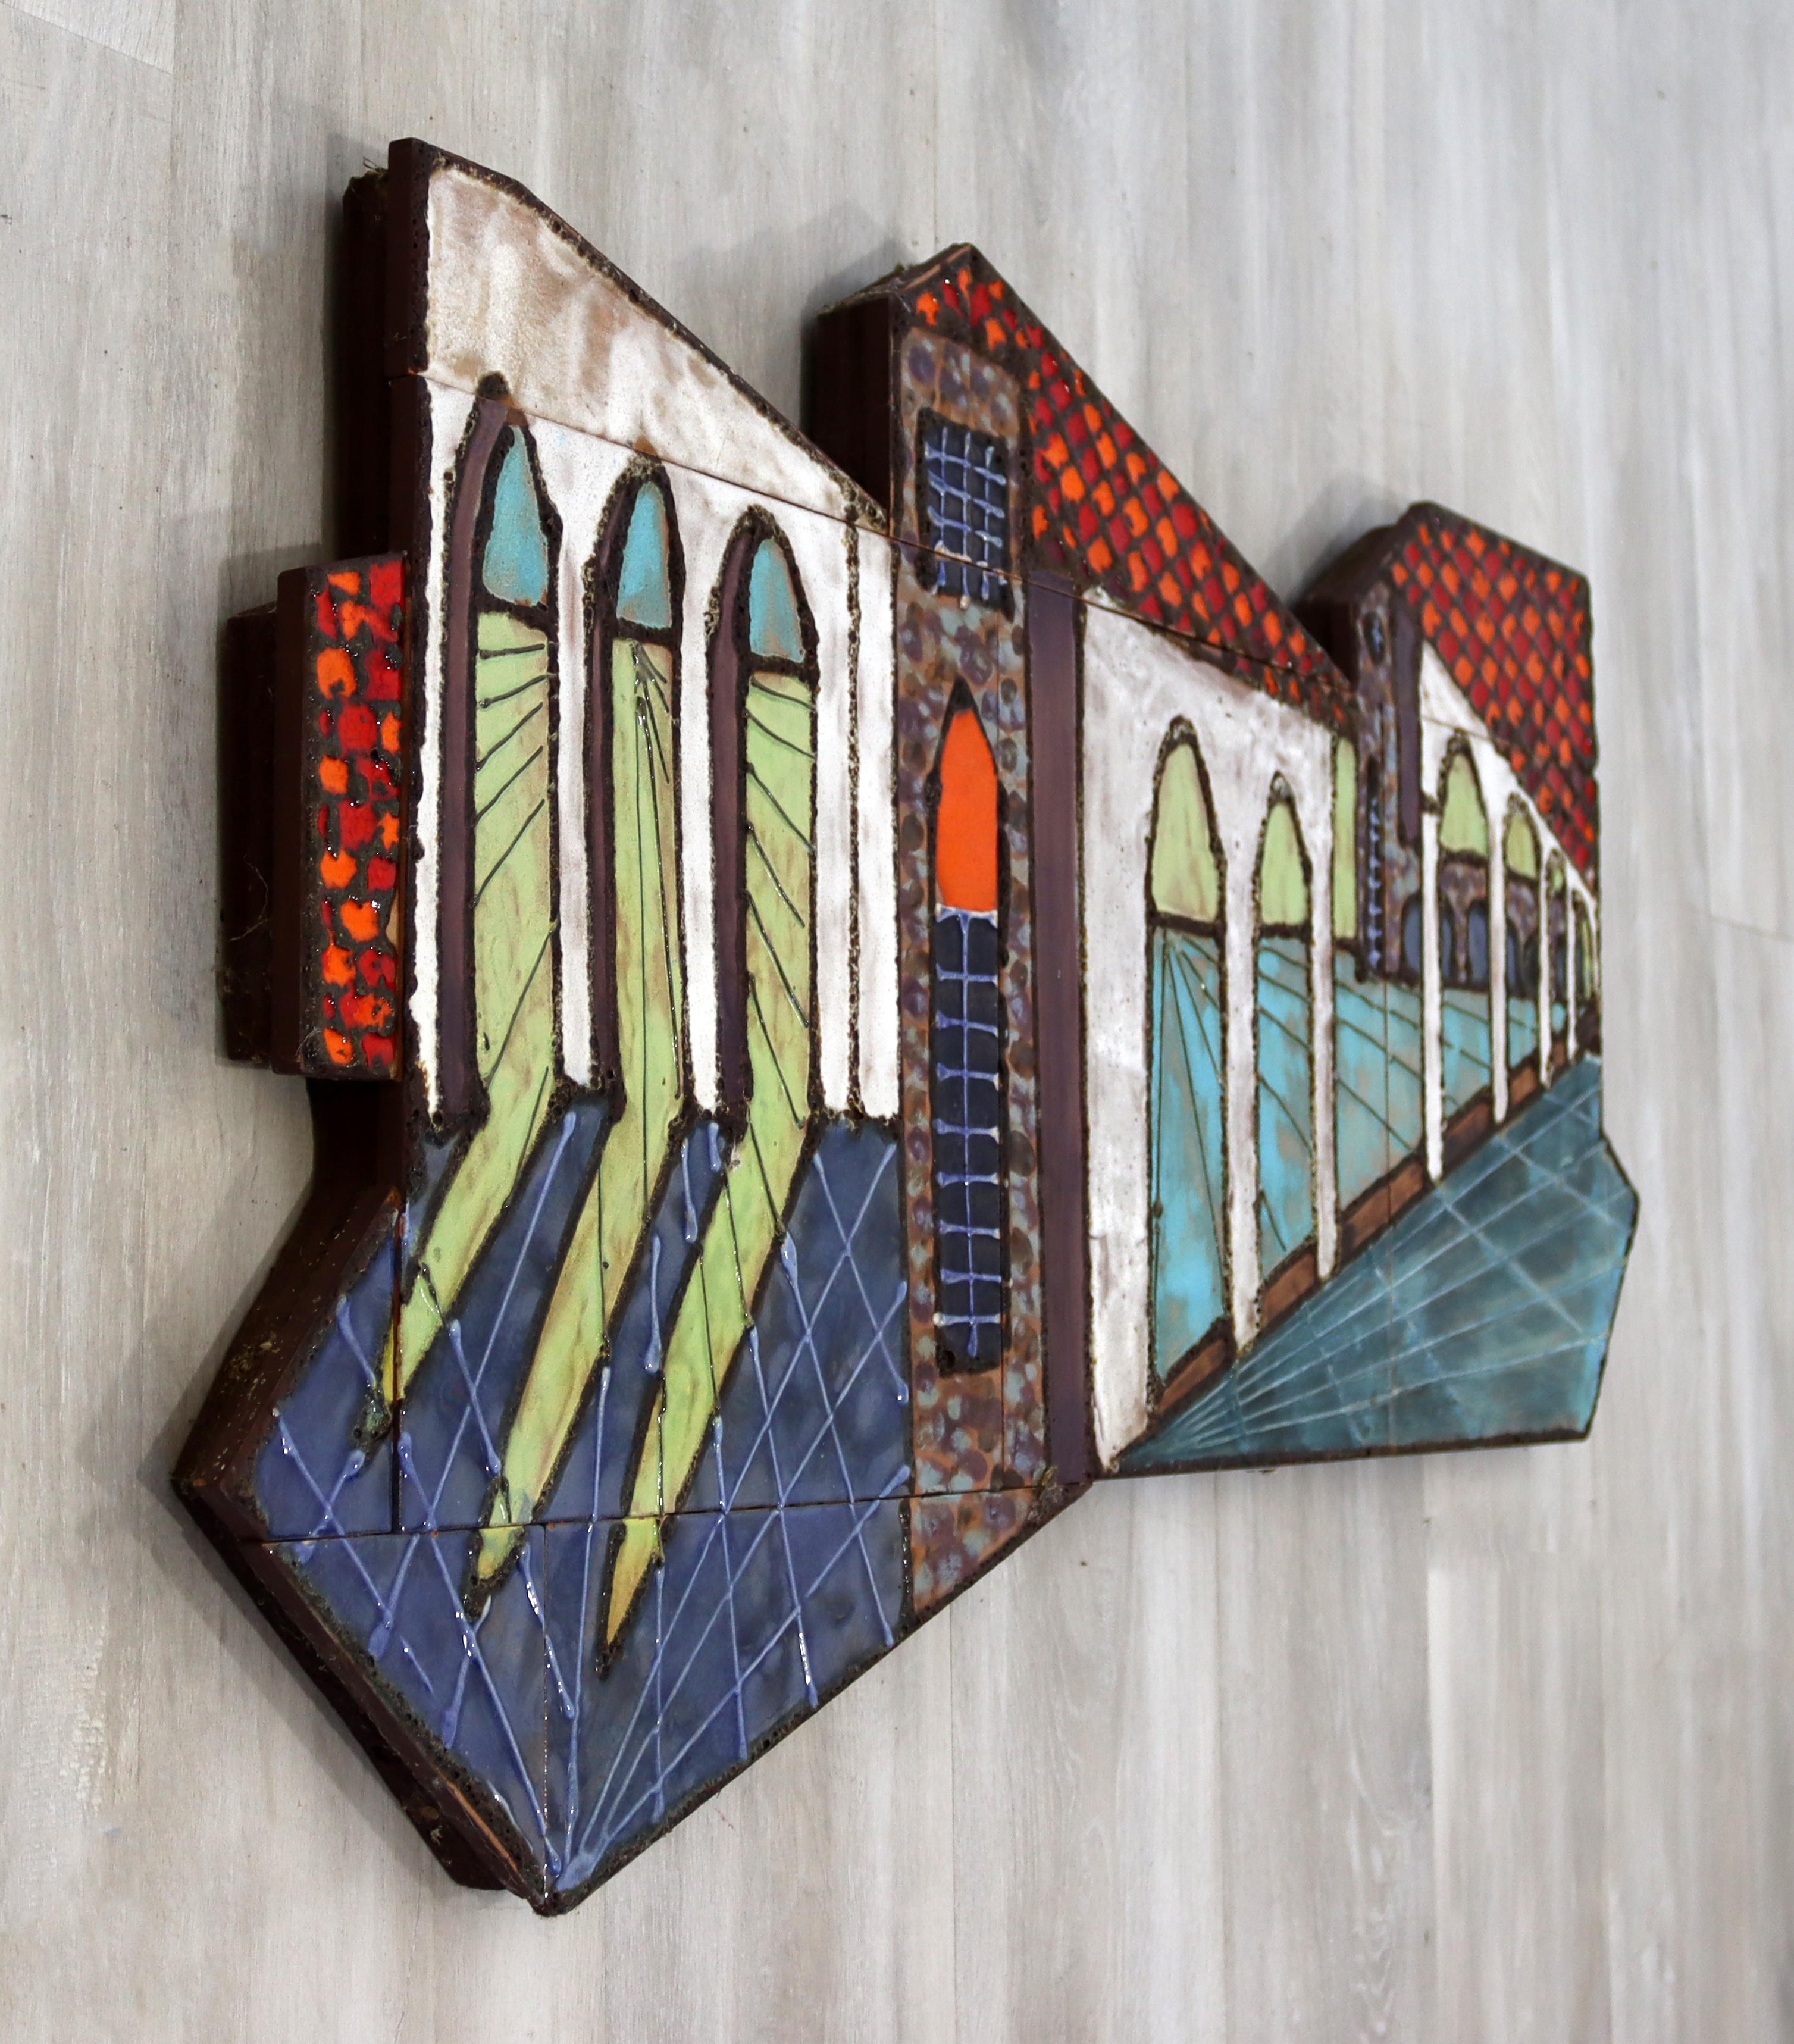 Late 20th Century Mid-Century Modern Harris Strong Style Ceramic Window Hanging Wall Sculpture 70s